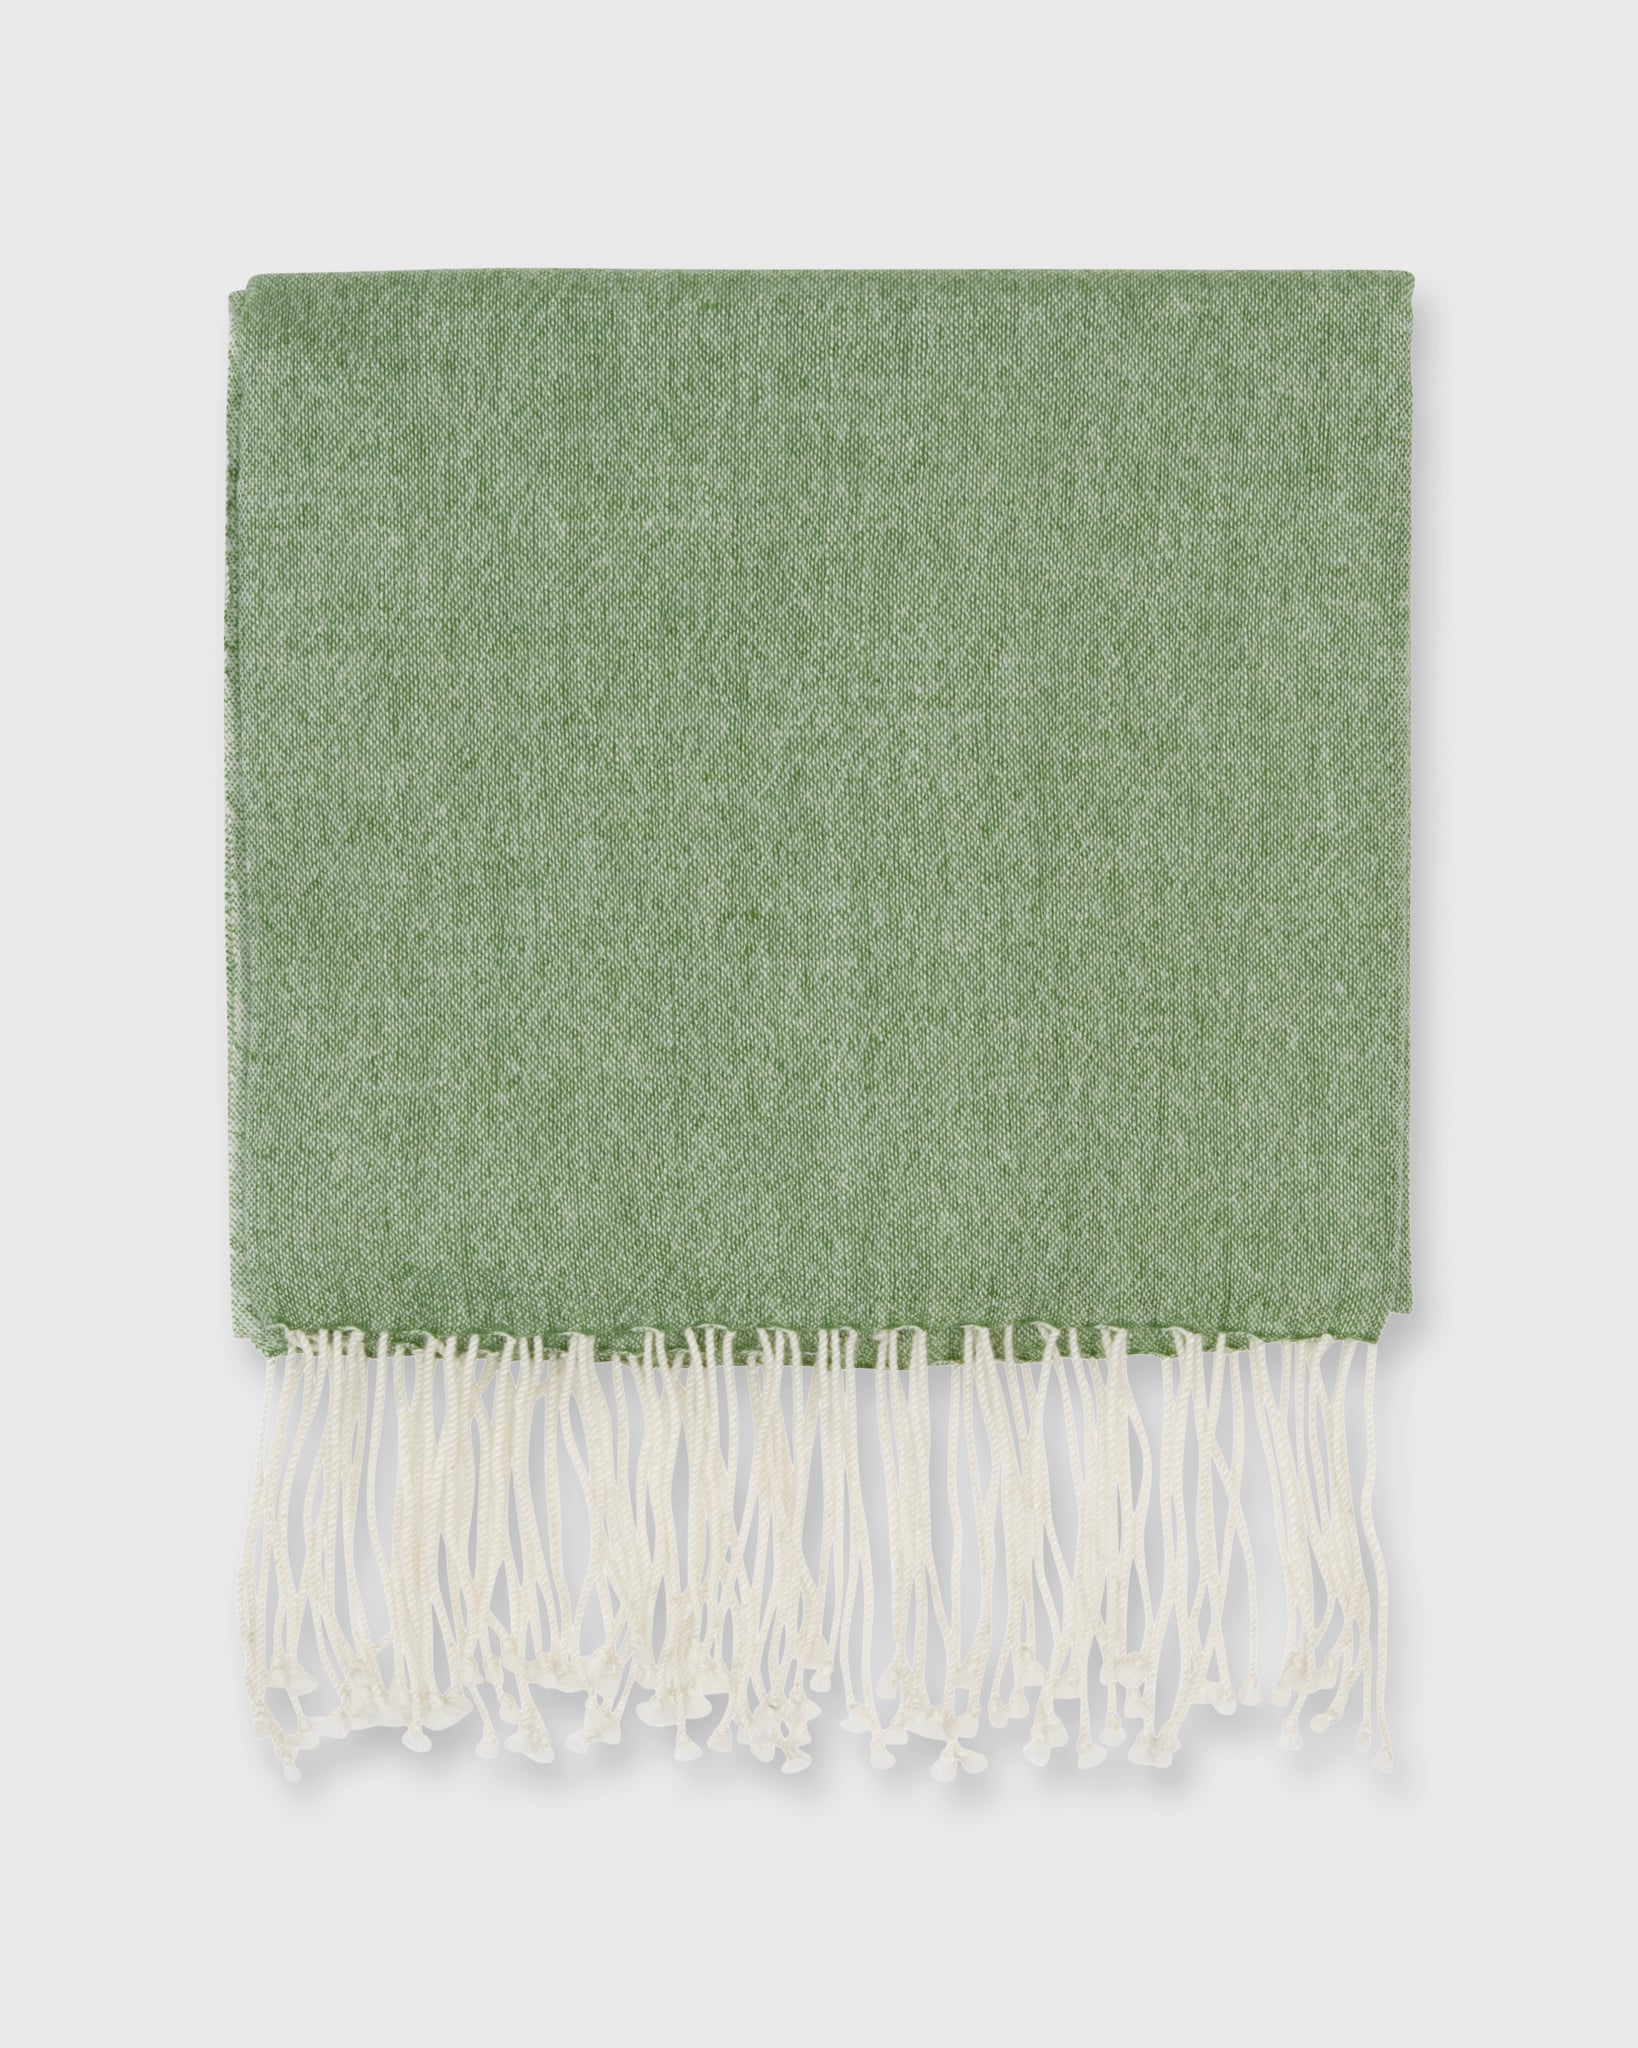 Cashmere Gauze Scarf in Green/White